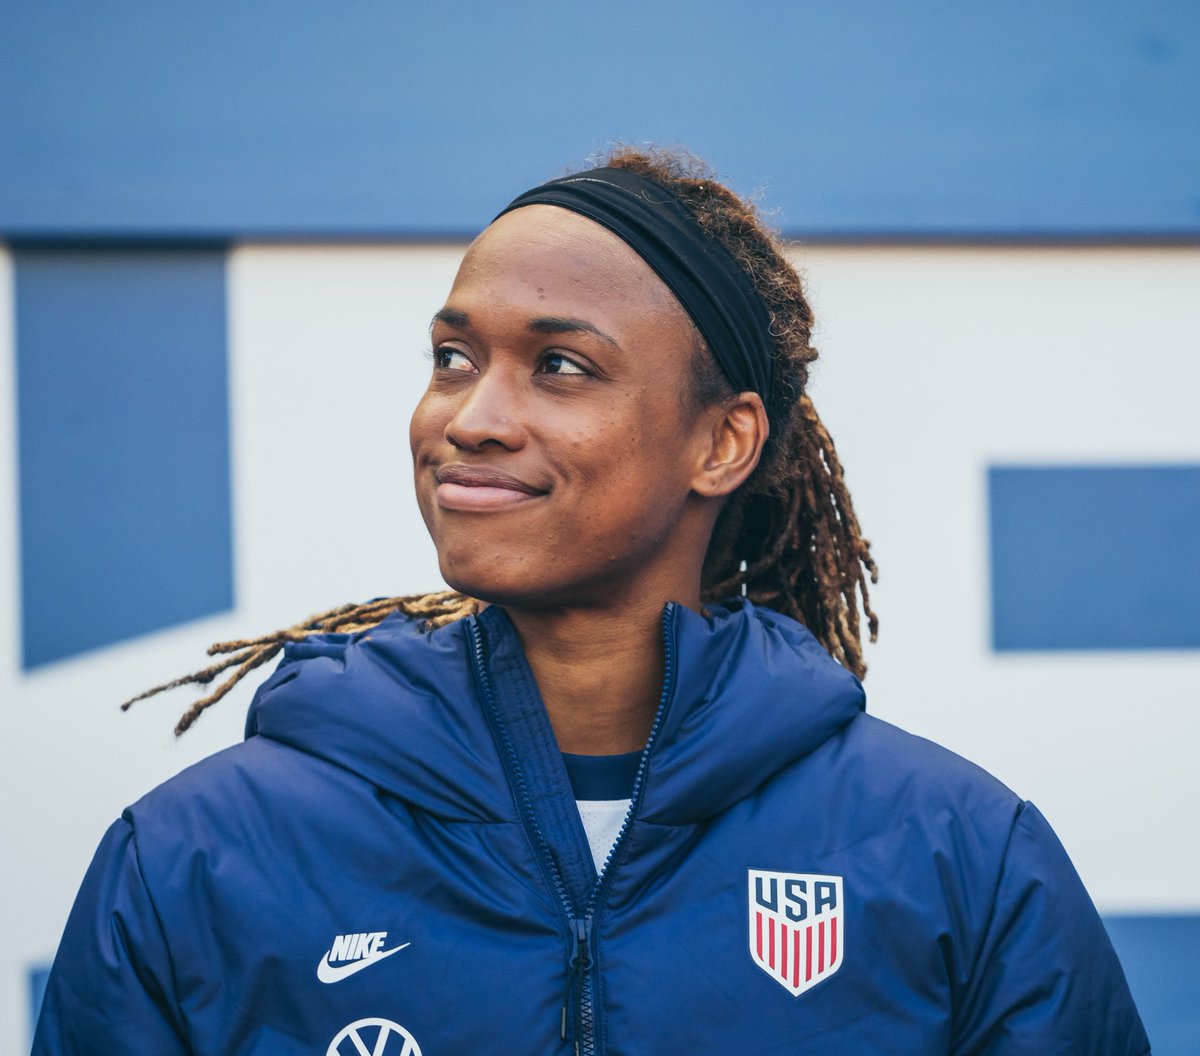 jessica mcdonald: she was the first nwsl player to reach 33 regular-season goals; in 2014 she scored the fastest goal in nwsl history (33 seconds) and was named mvp of the championship match in 2018